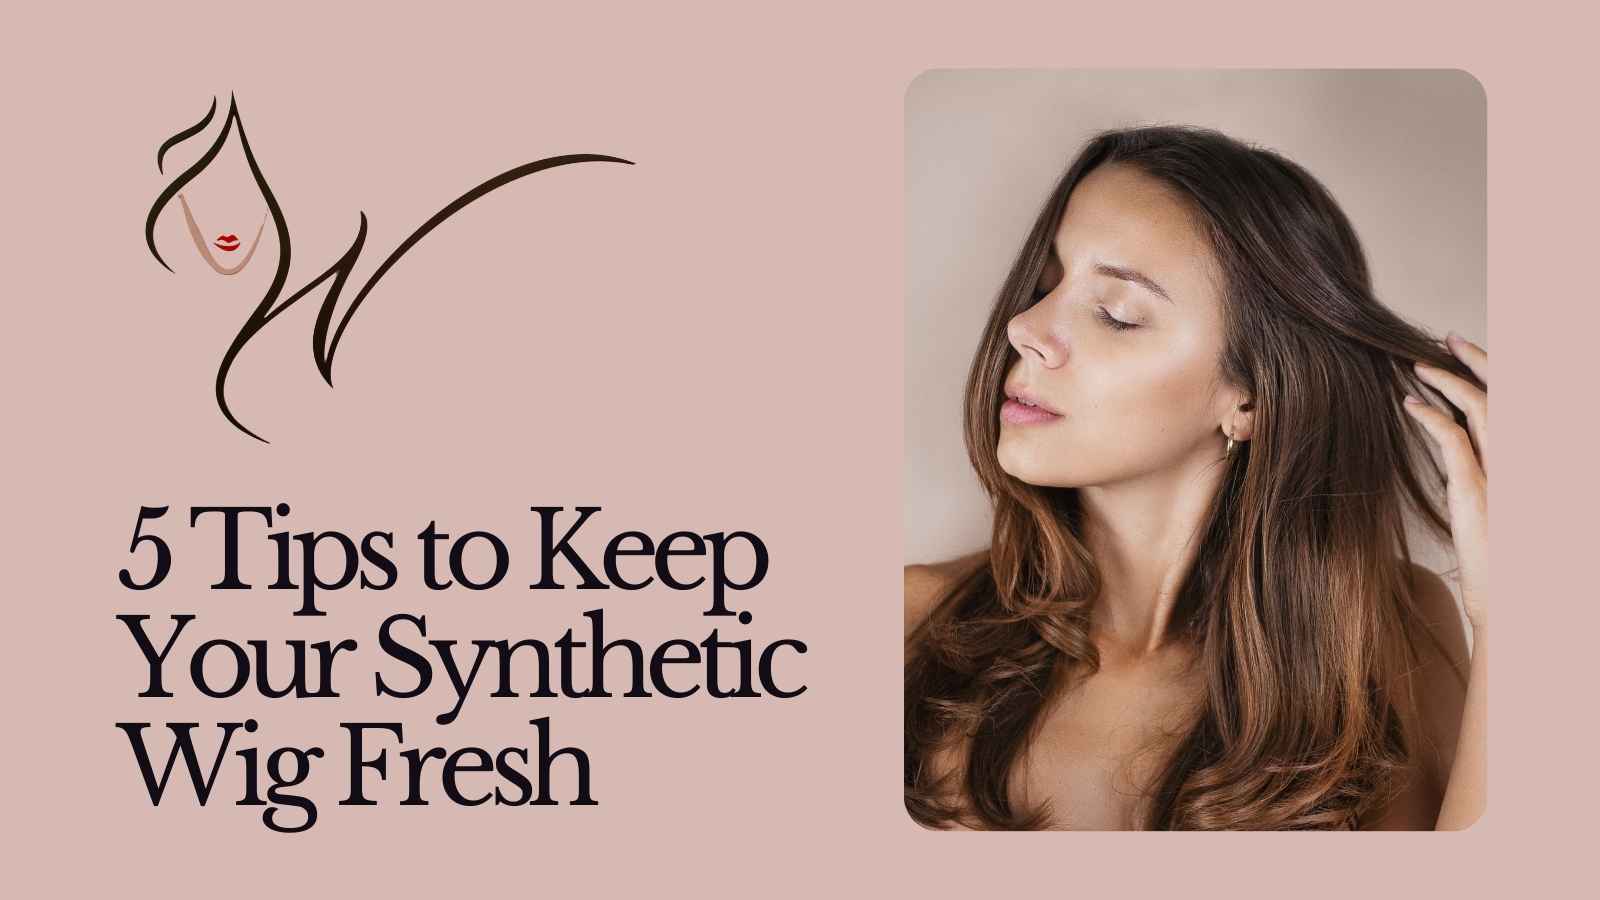 Keep Your Synthetic Wig Fresh